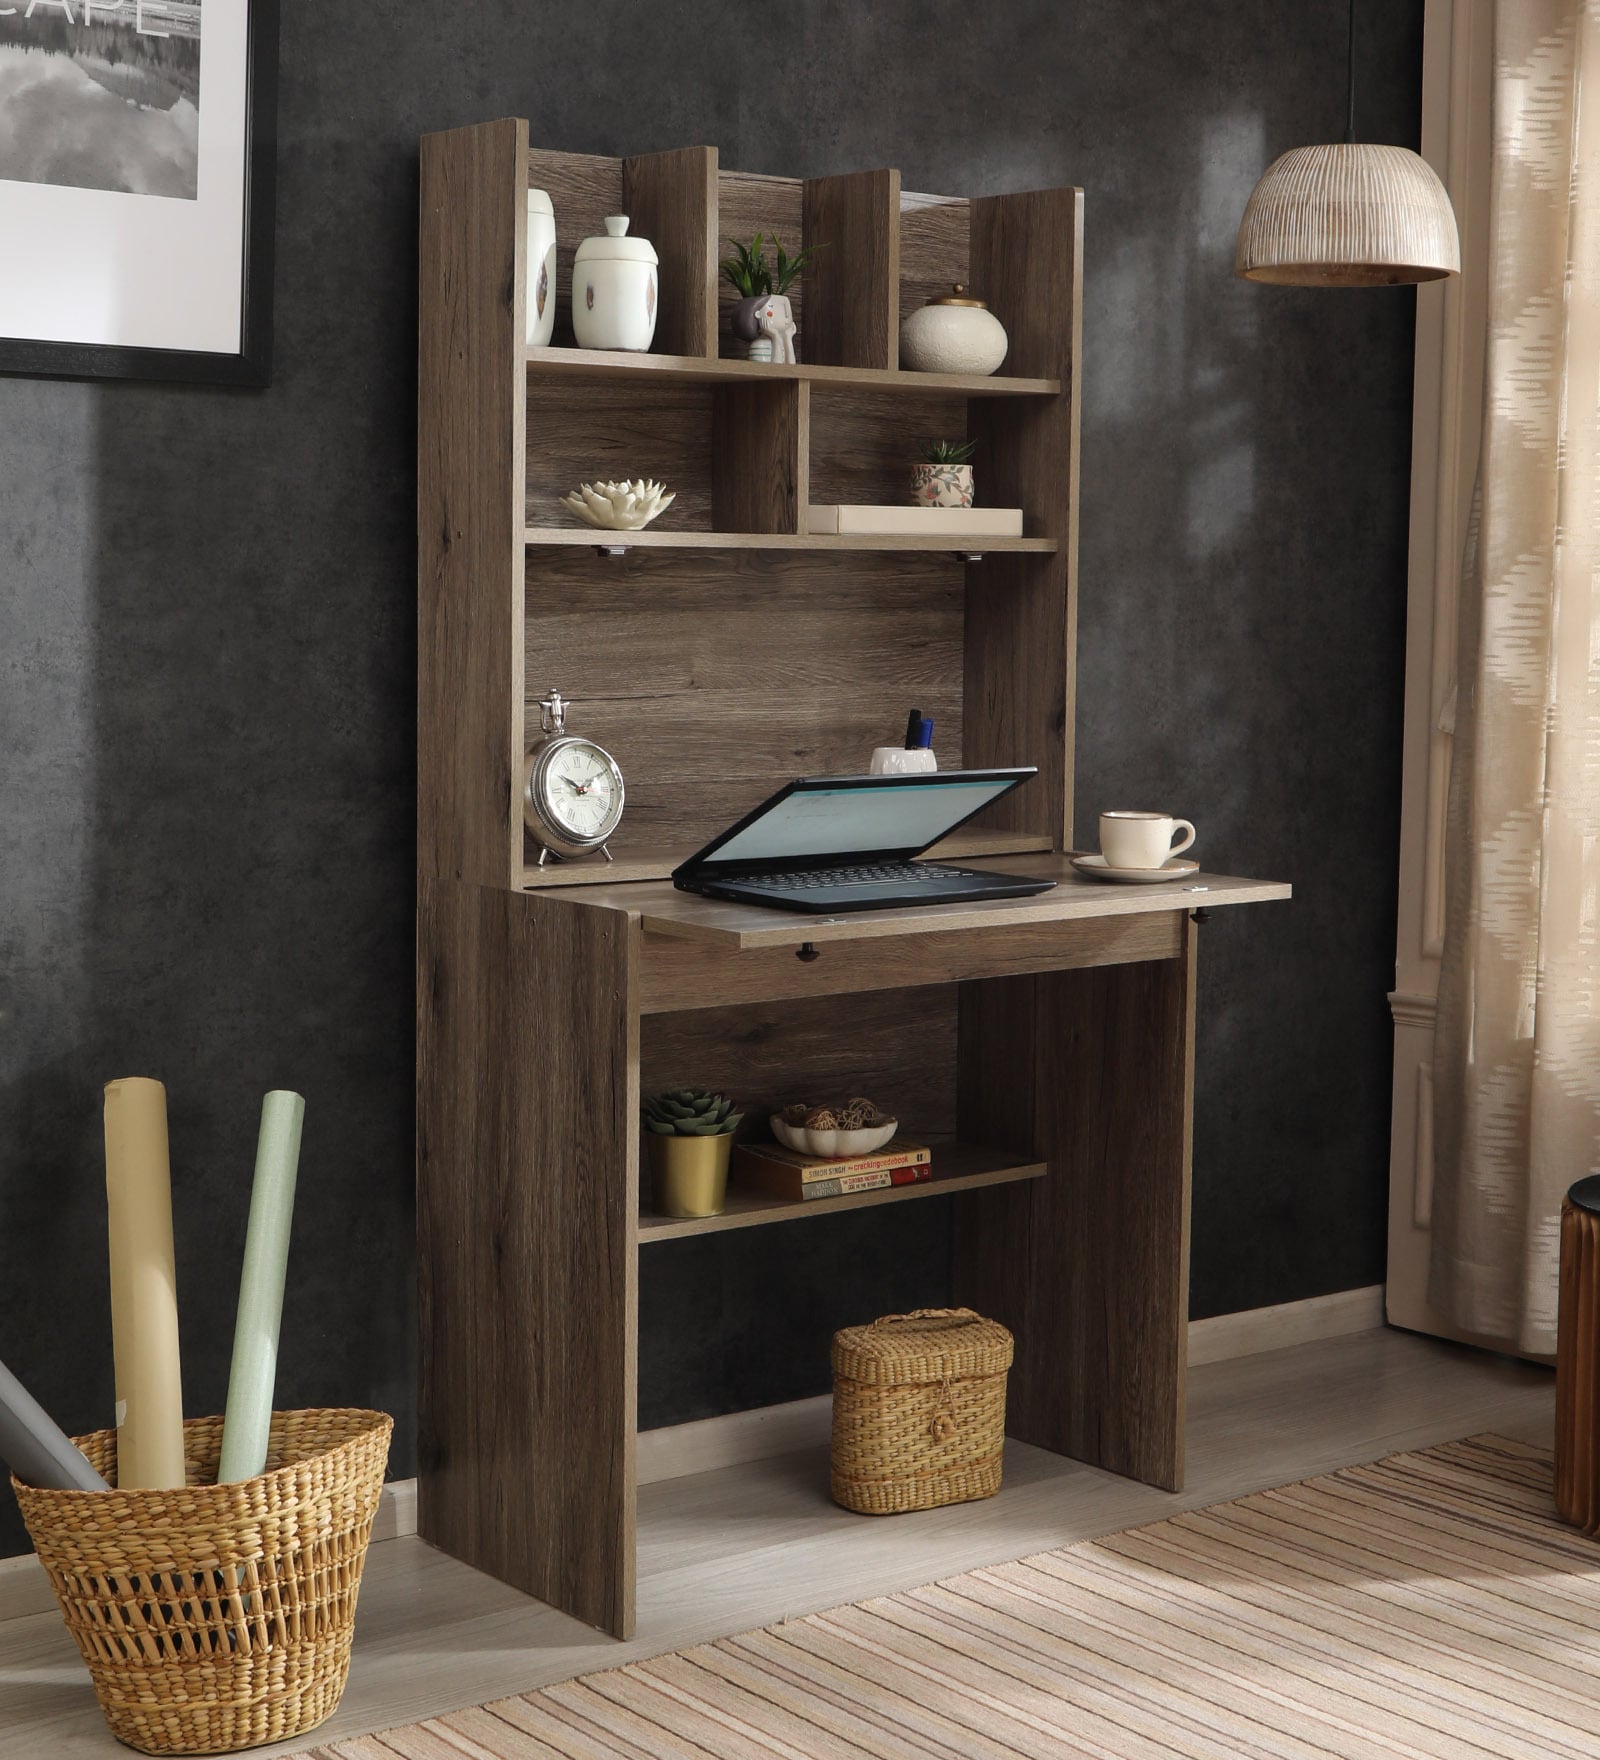 Buy Mikki Hutch Desk in Rainwood Finish at 27% OFF by Valuewud from ...